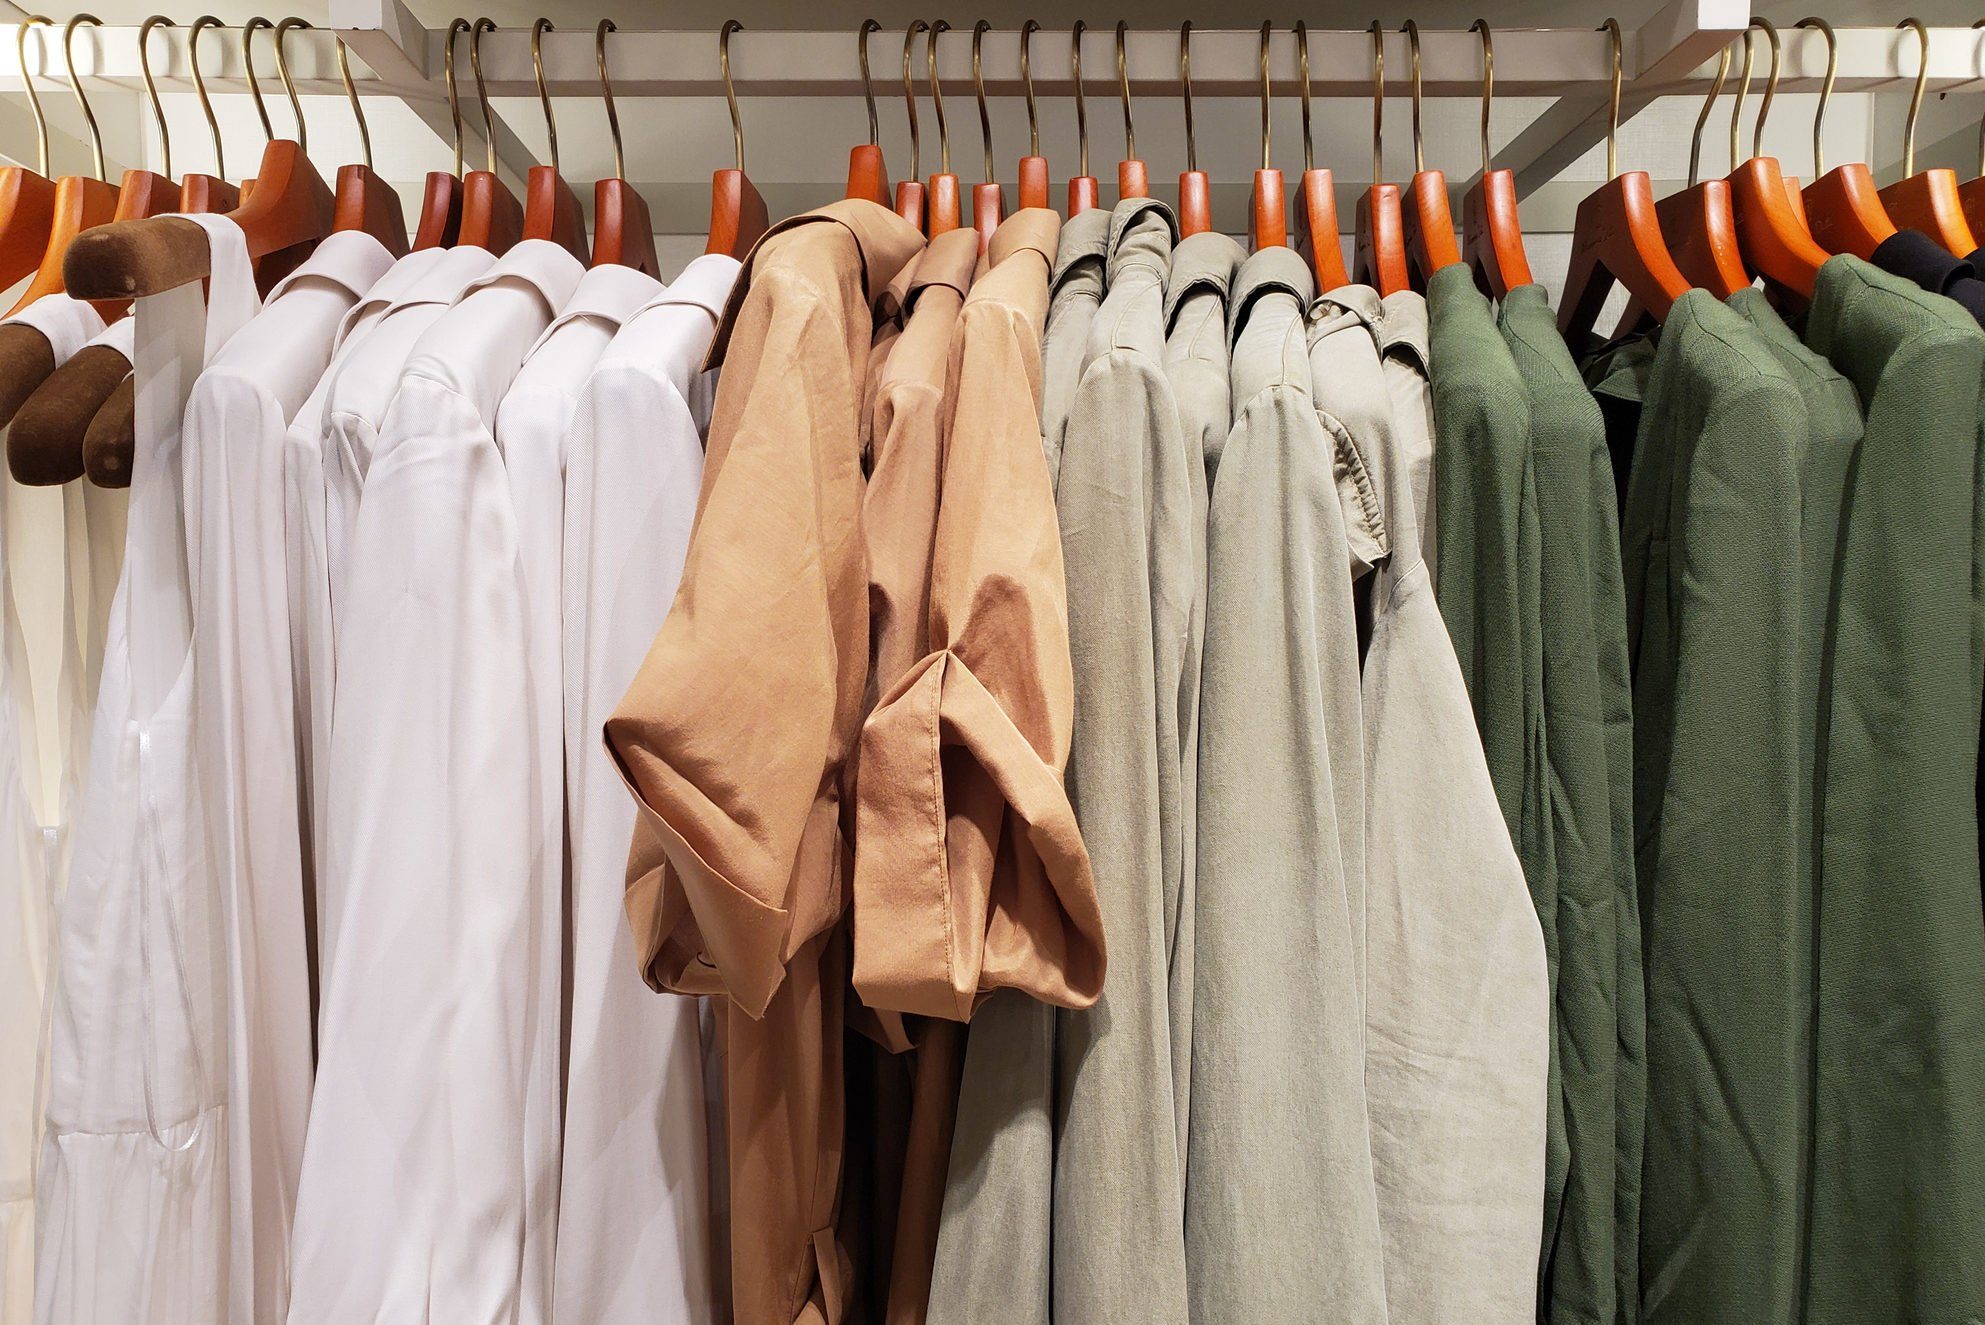 Neatly hung clothes on hangers